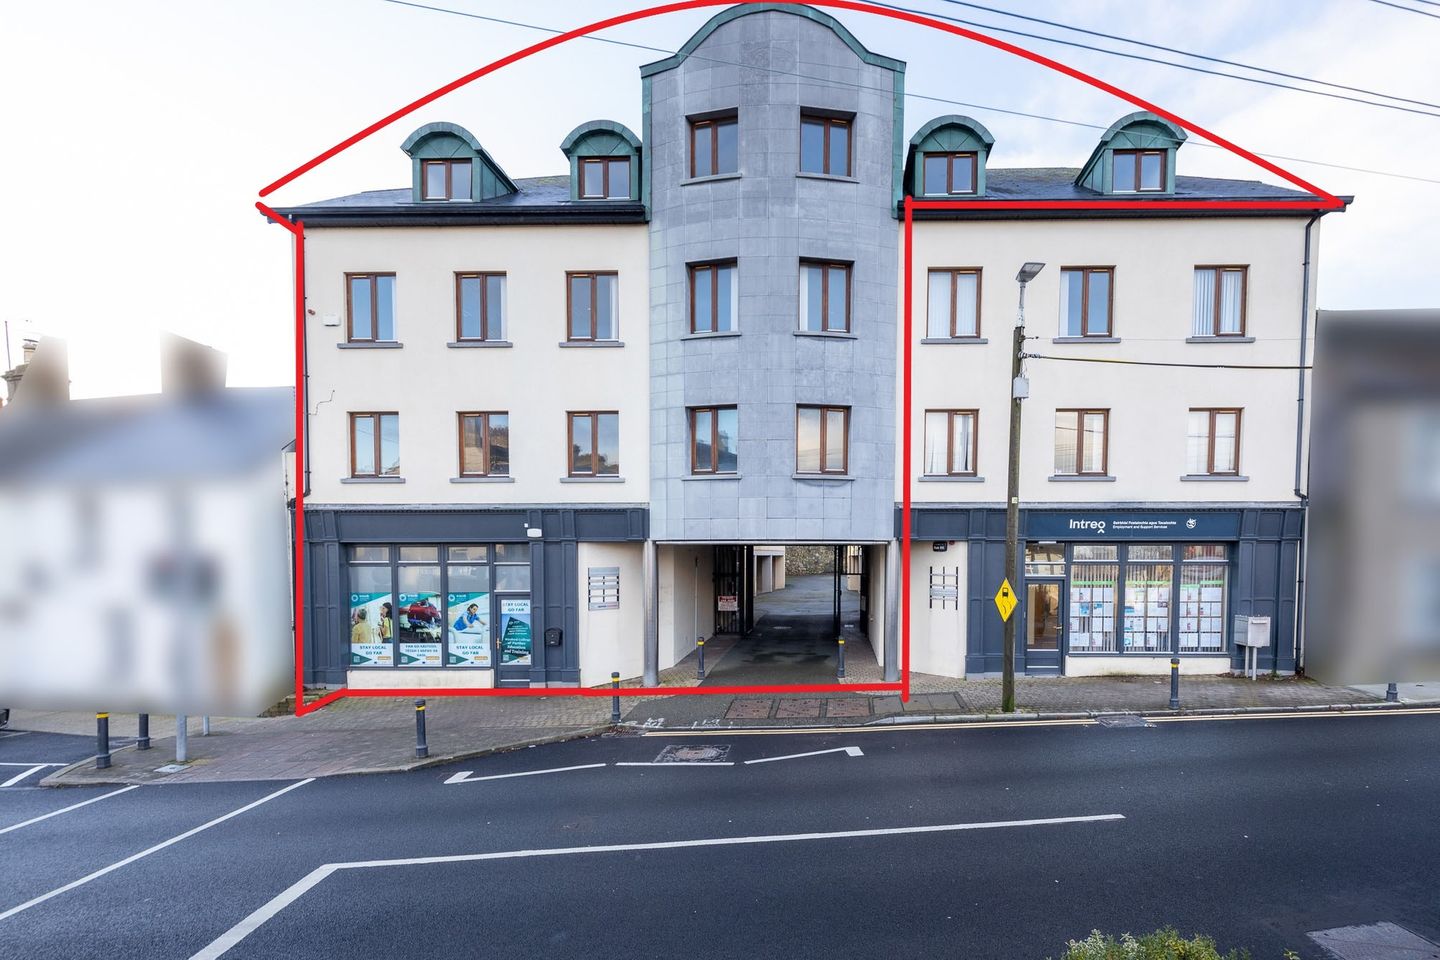 "Norse Gate House", St. Peter's Square, Wexford Town, Co. Wexford